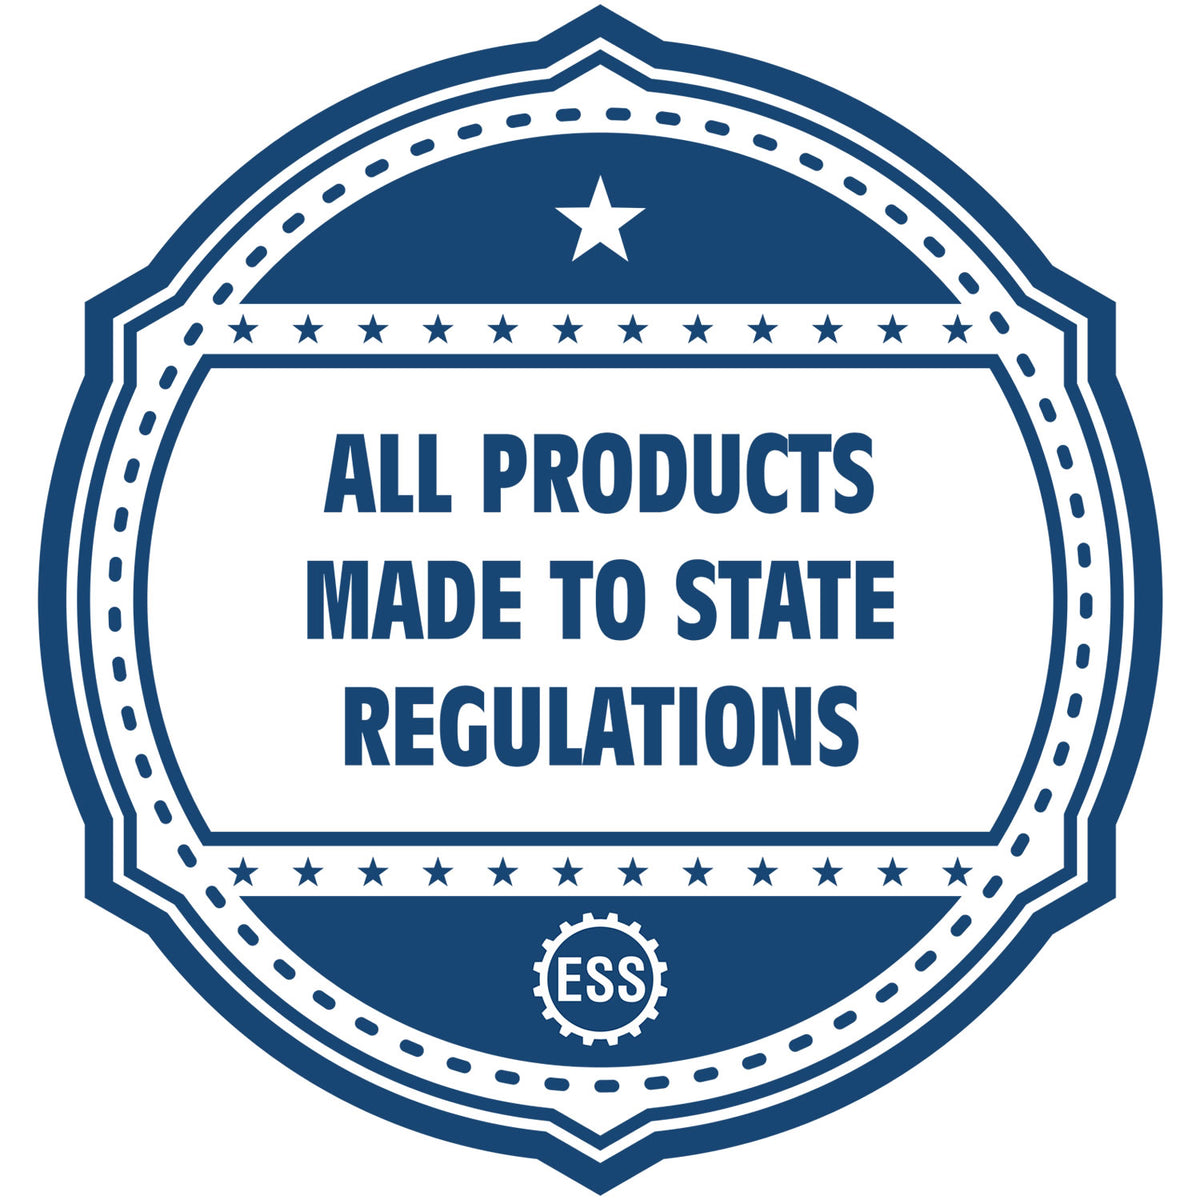 A blue icon or badge for the Hybrid West Virginia Engineer Seal showing that this product is made in compliance with state regulations.